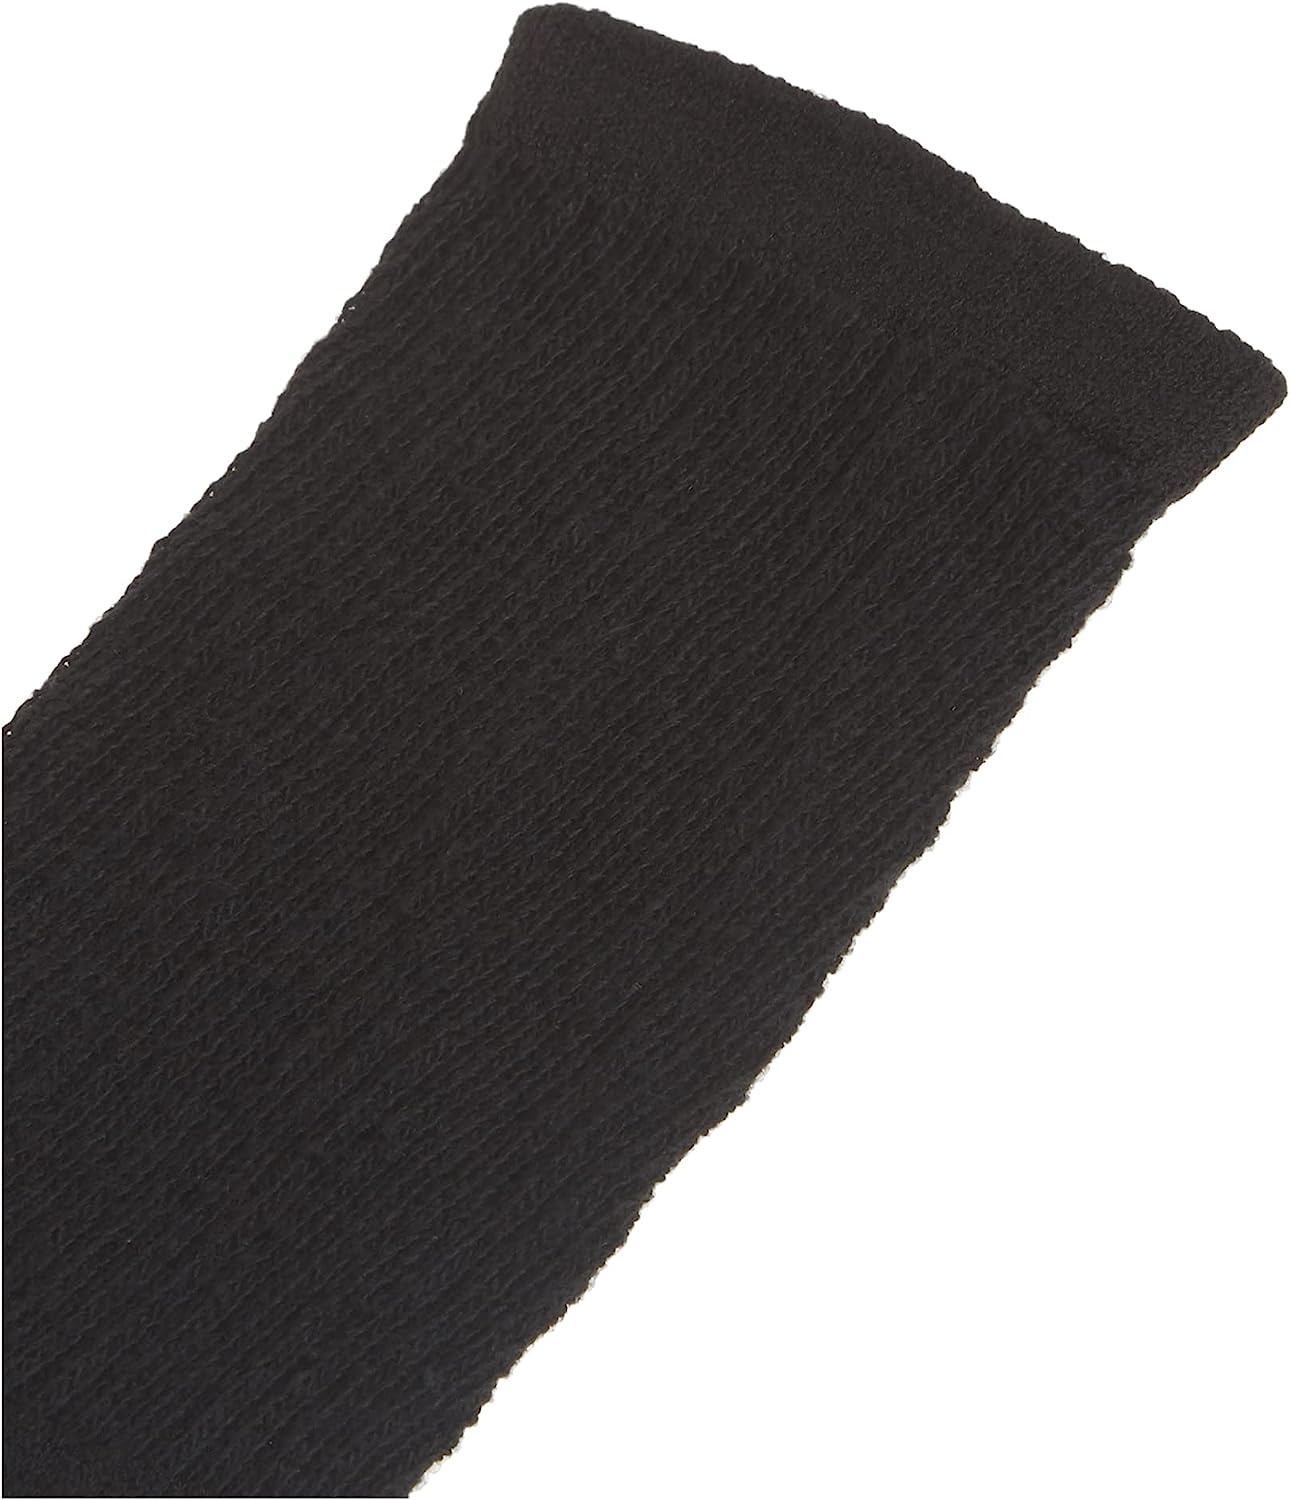 Sifot Fruit of the Loom Men's Cushioned Durable Cotton Work Gear Socks with Moisture Wicking